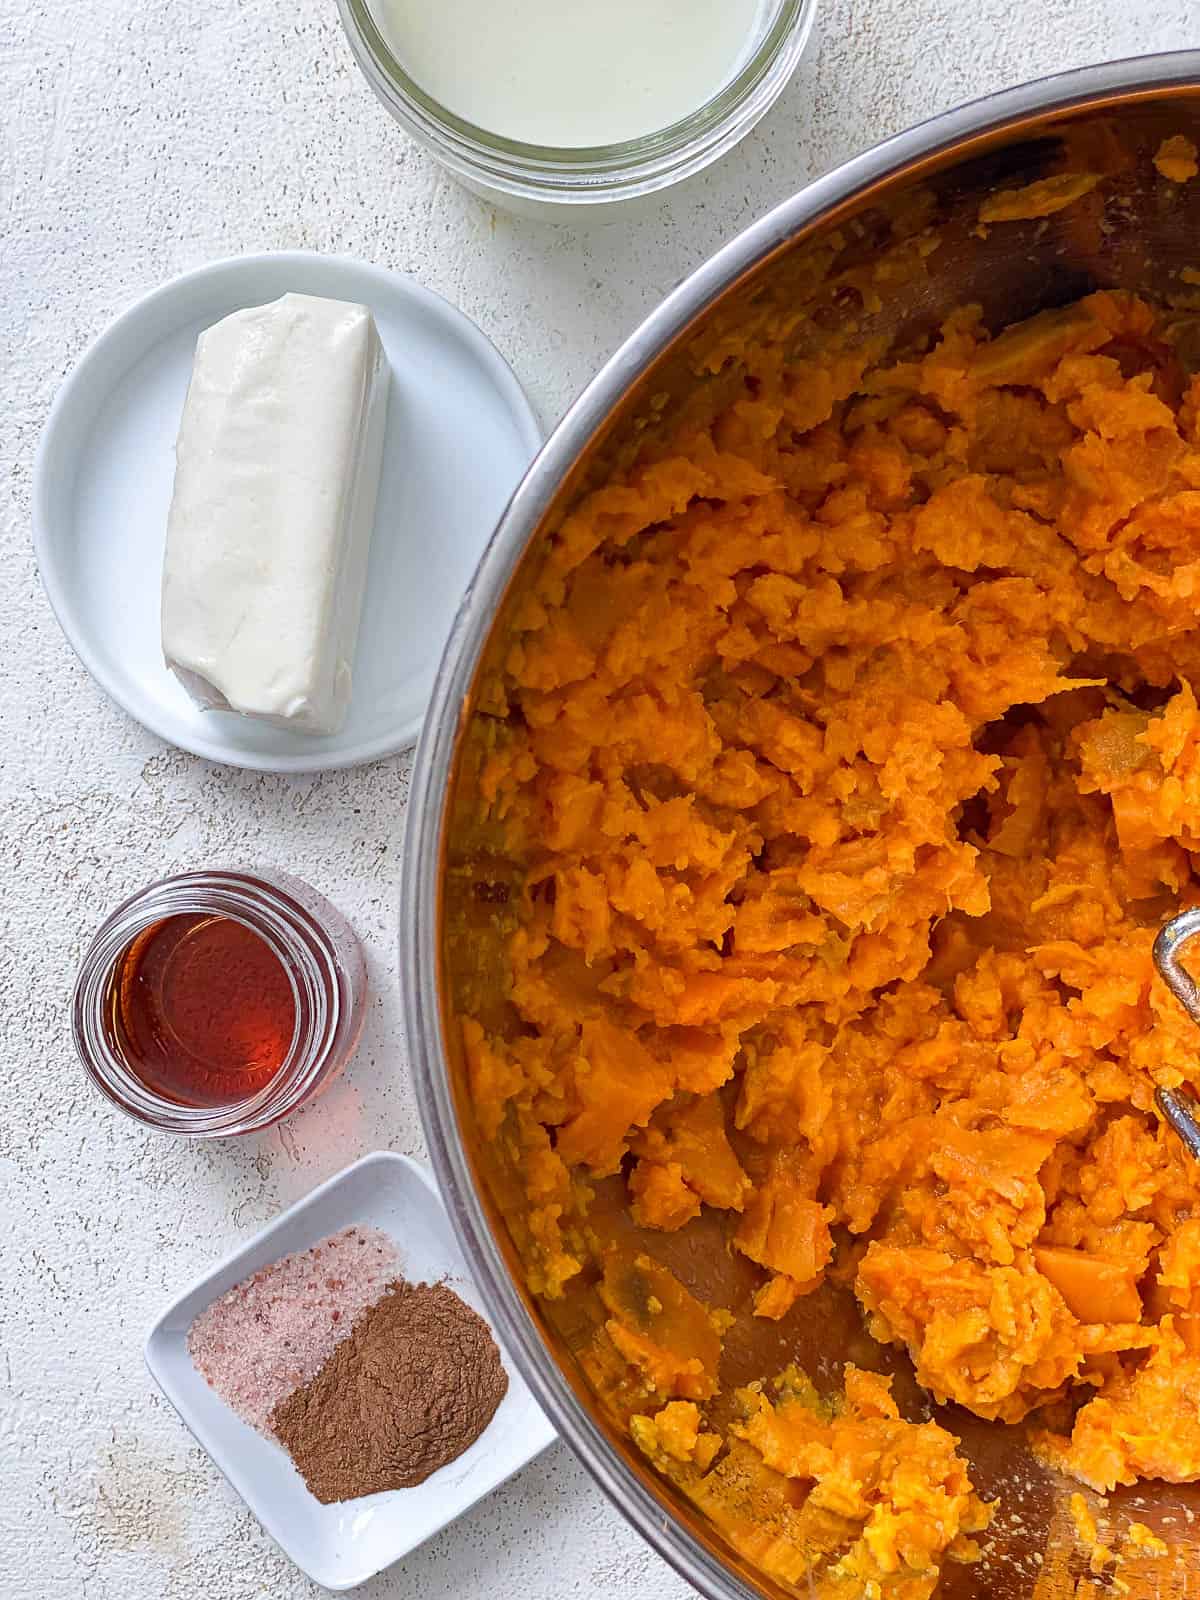 Mashed sweet potatoes in a silver bowl with vegan butter, plant milk, salt, cinnamon, and maple syrup on the left side of the bowl in small containers.